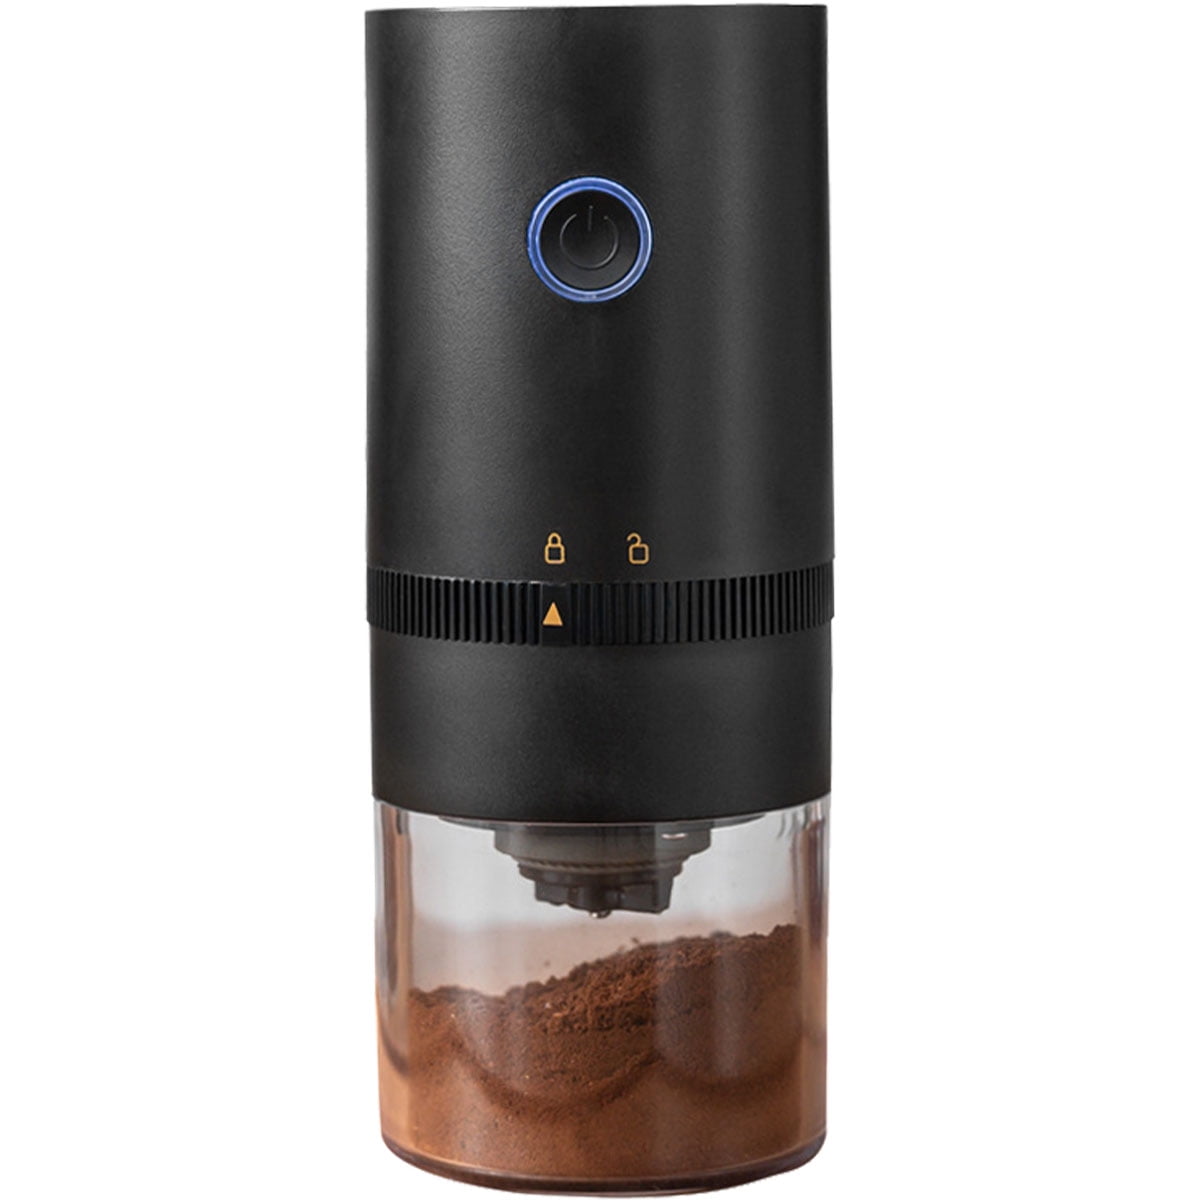 Portable Automatic Coffee Grinder – Warm-Breeze